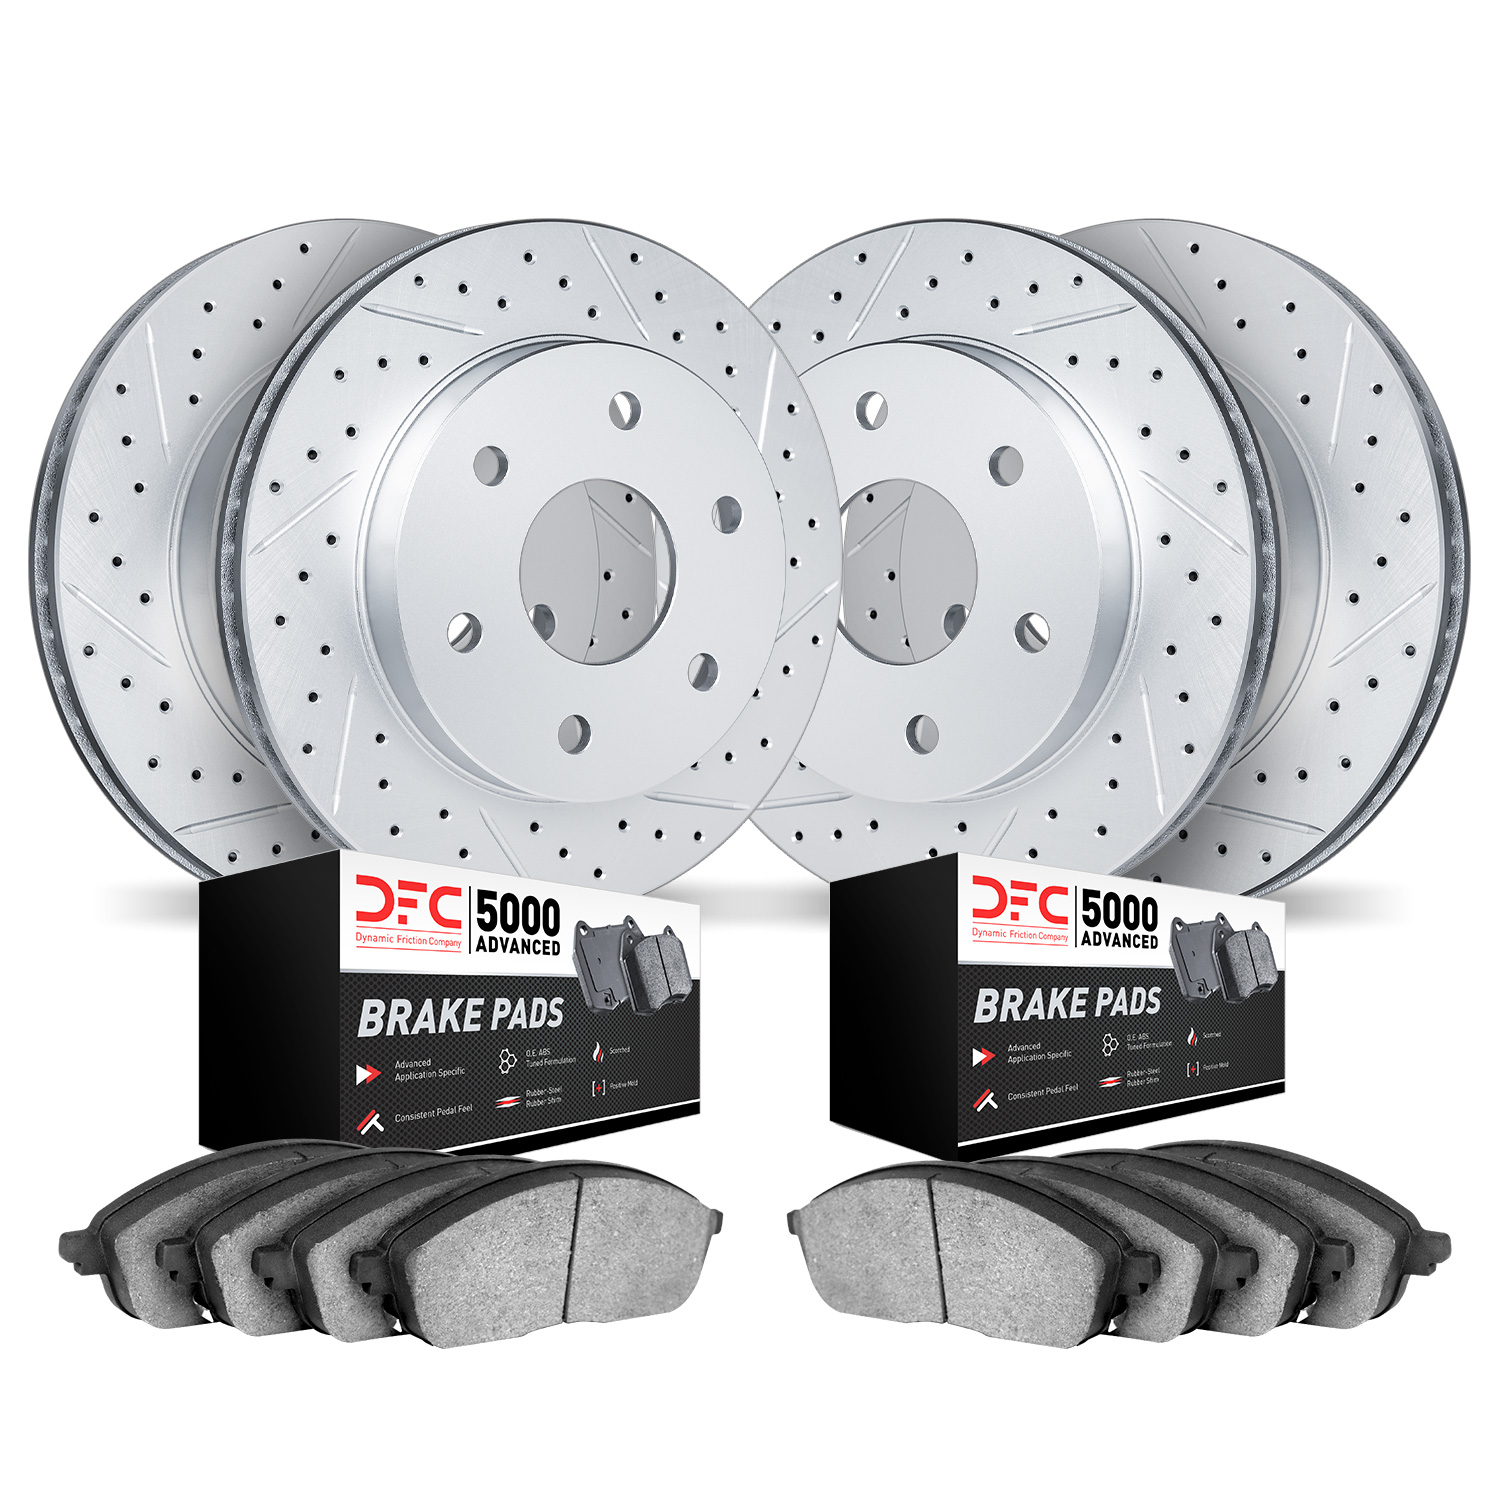 2504-48026 Geoperformance Drilled/Slotted Rotors w/5000 Advanced Brake Pads Kit, 2009-2014 GM, Position: Front and Rear